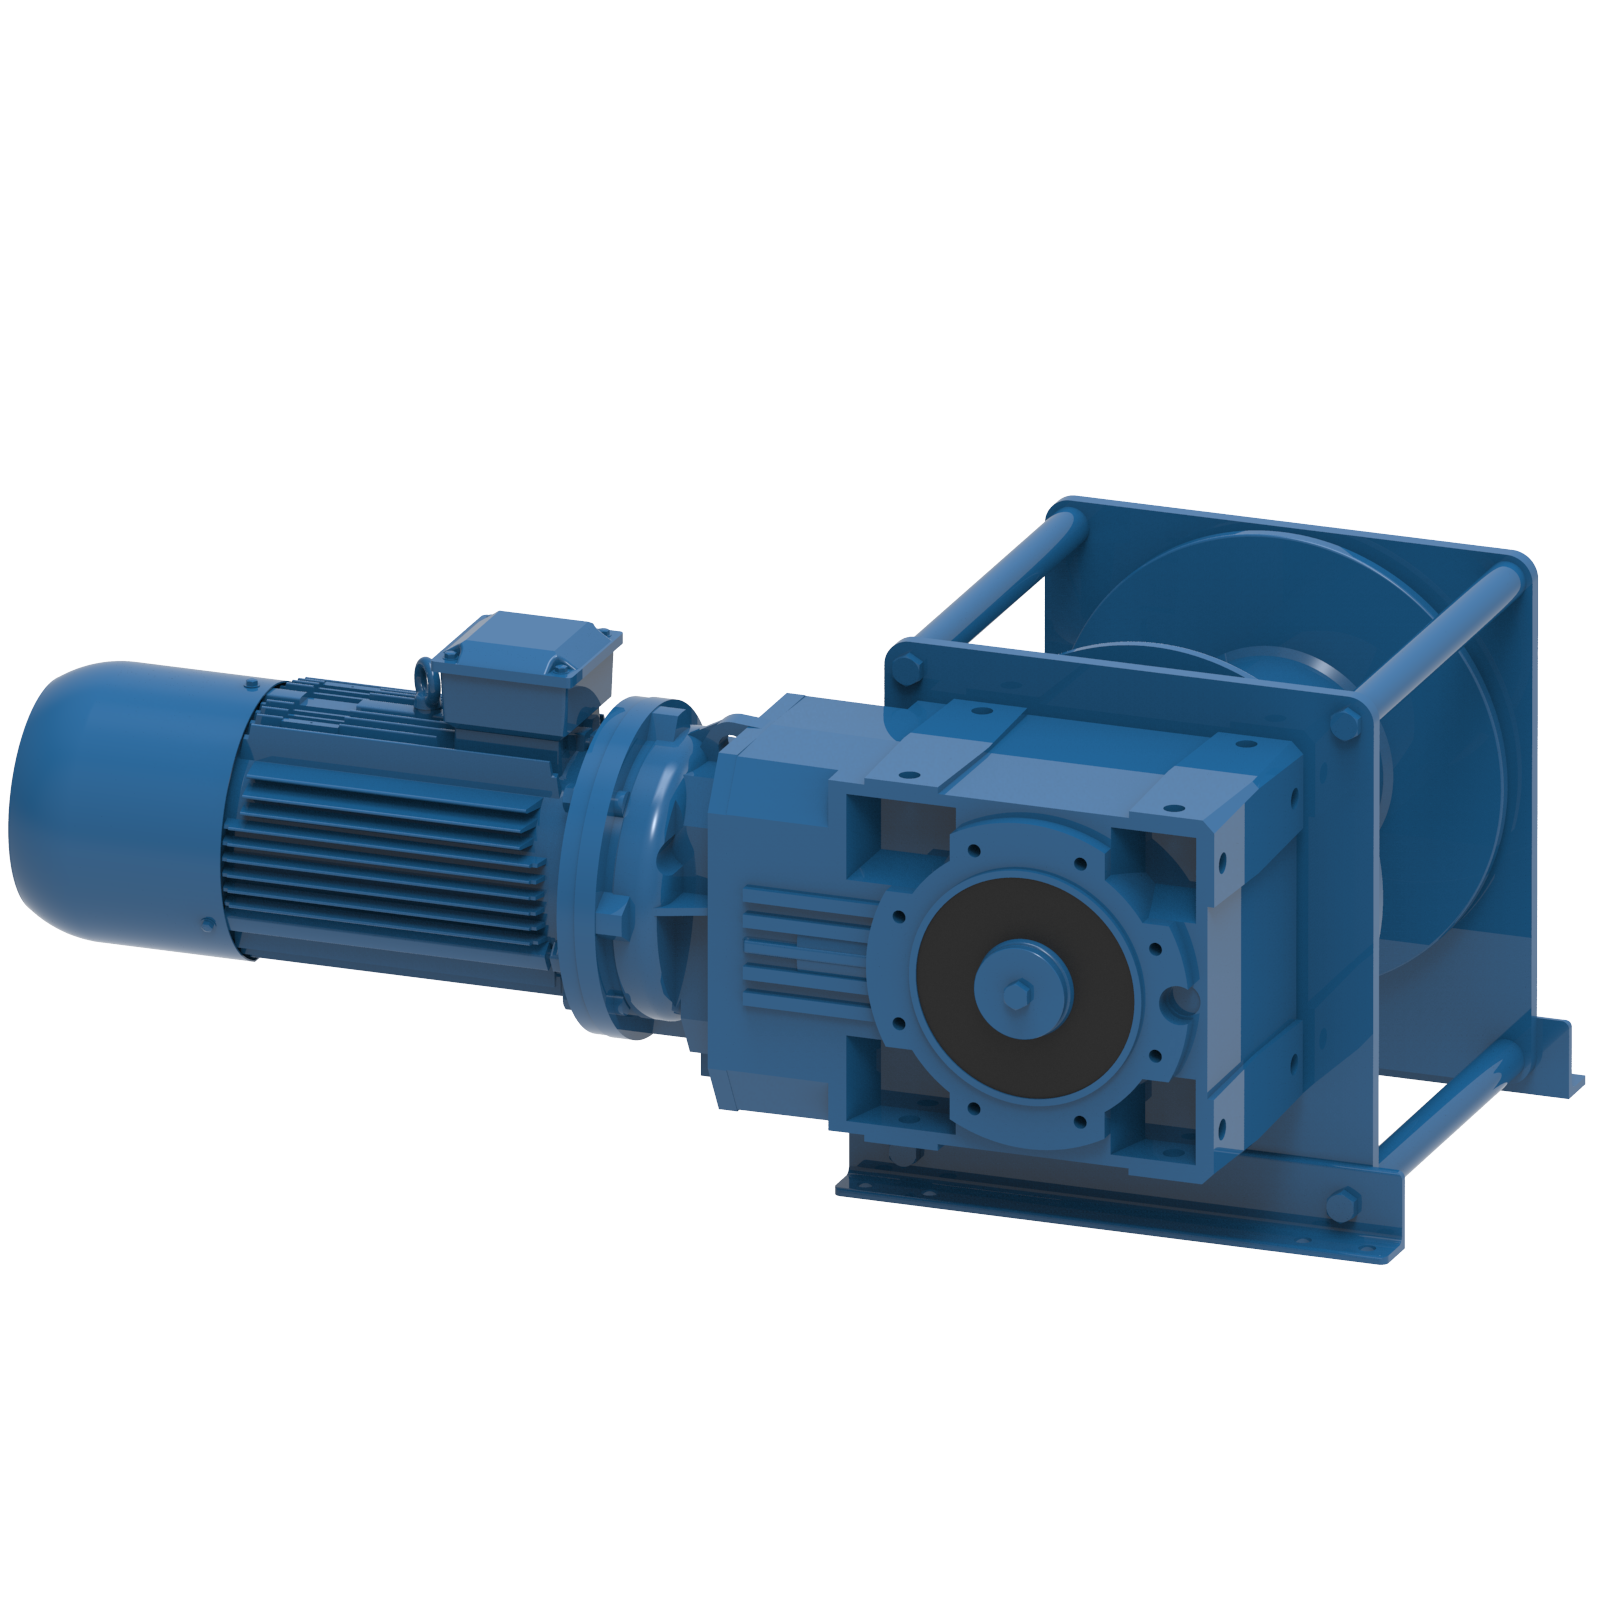 Render drawing of EMCE winch type A50M-E view number 1